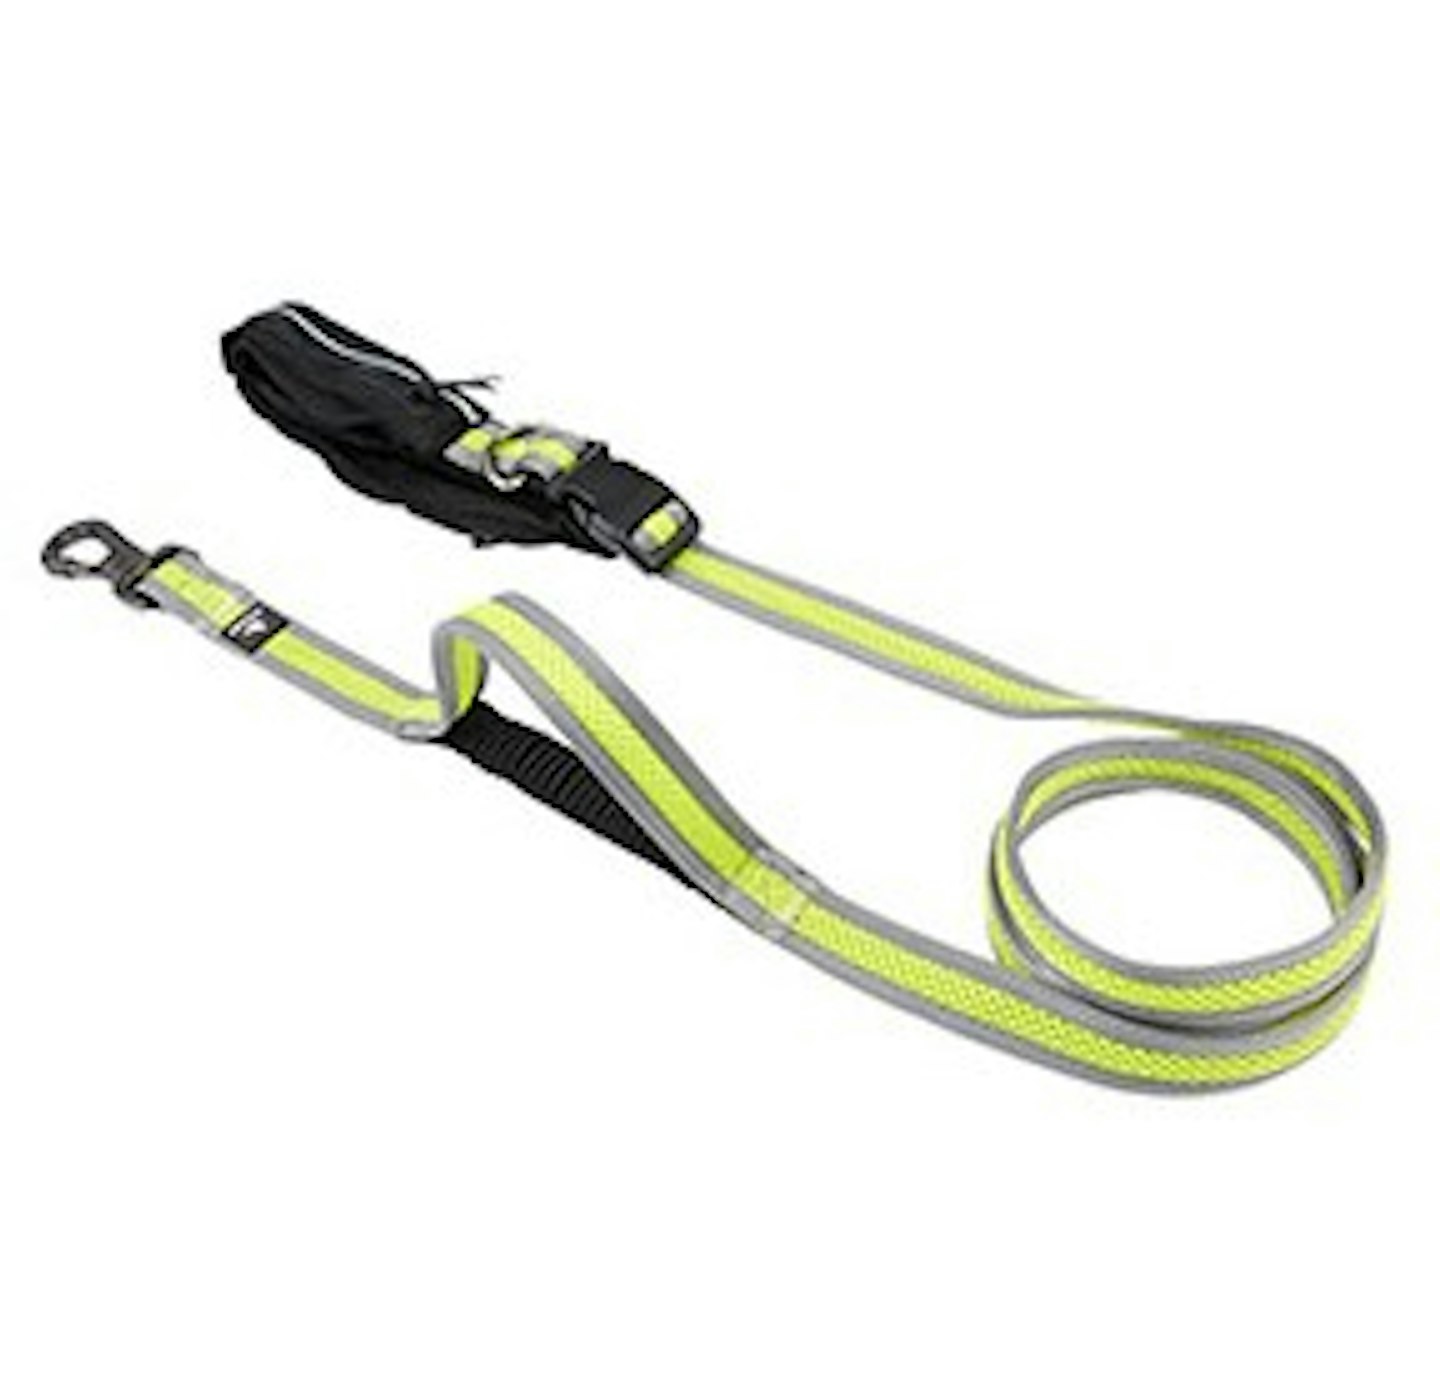 3 Peaks Running Dog Lead Grey and Neon Large